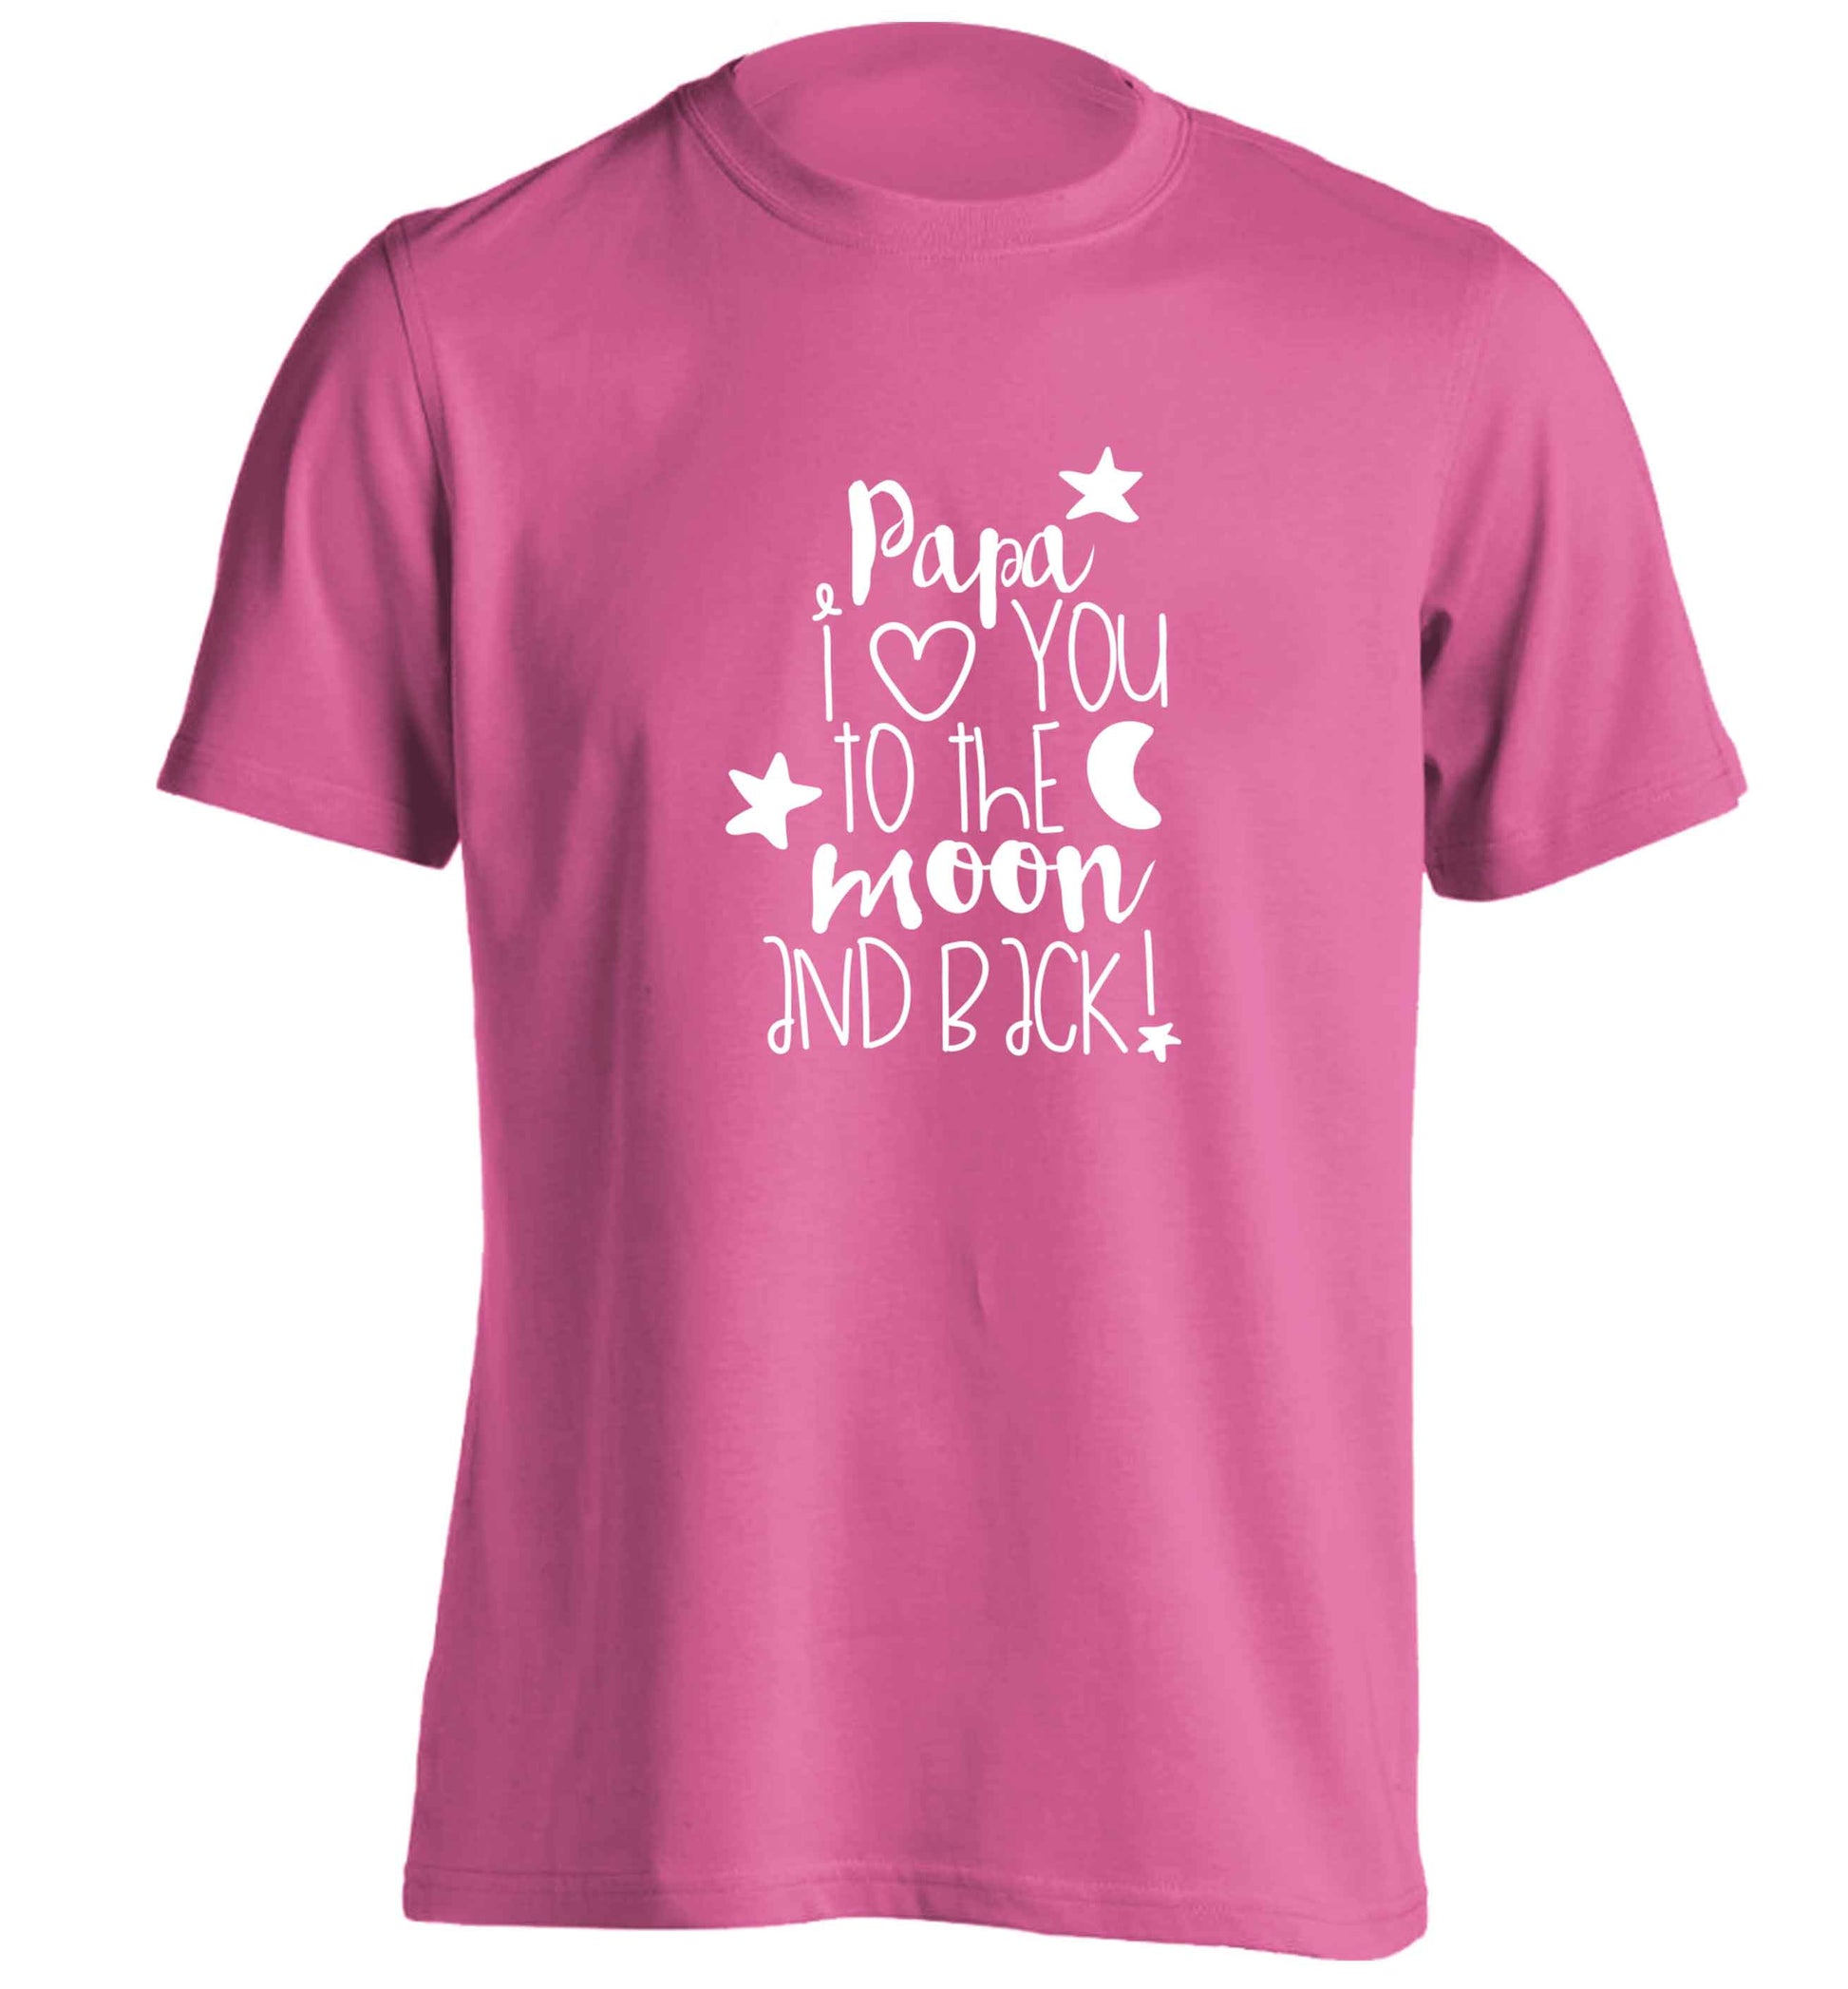 Papa I love you to the moon and back adults unisex pink Tshirt 2XL